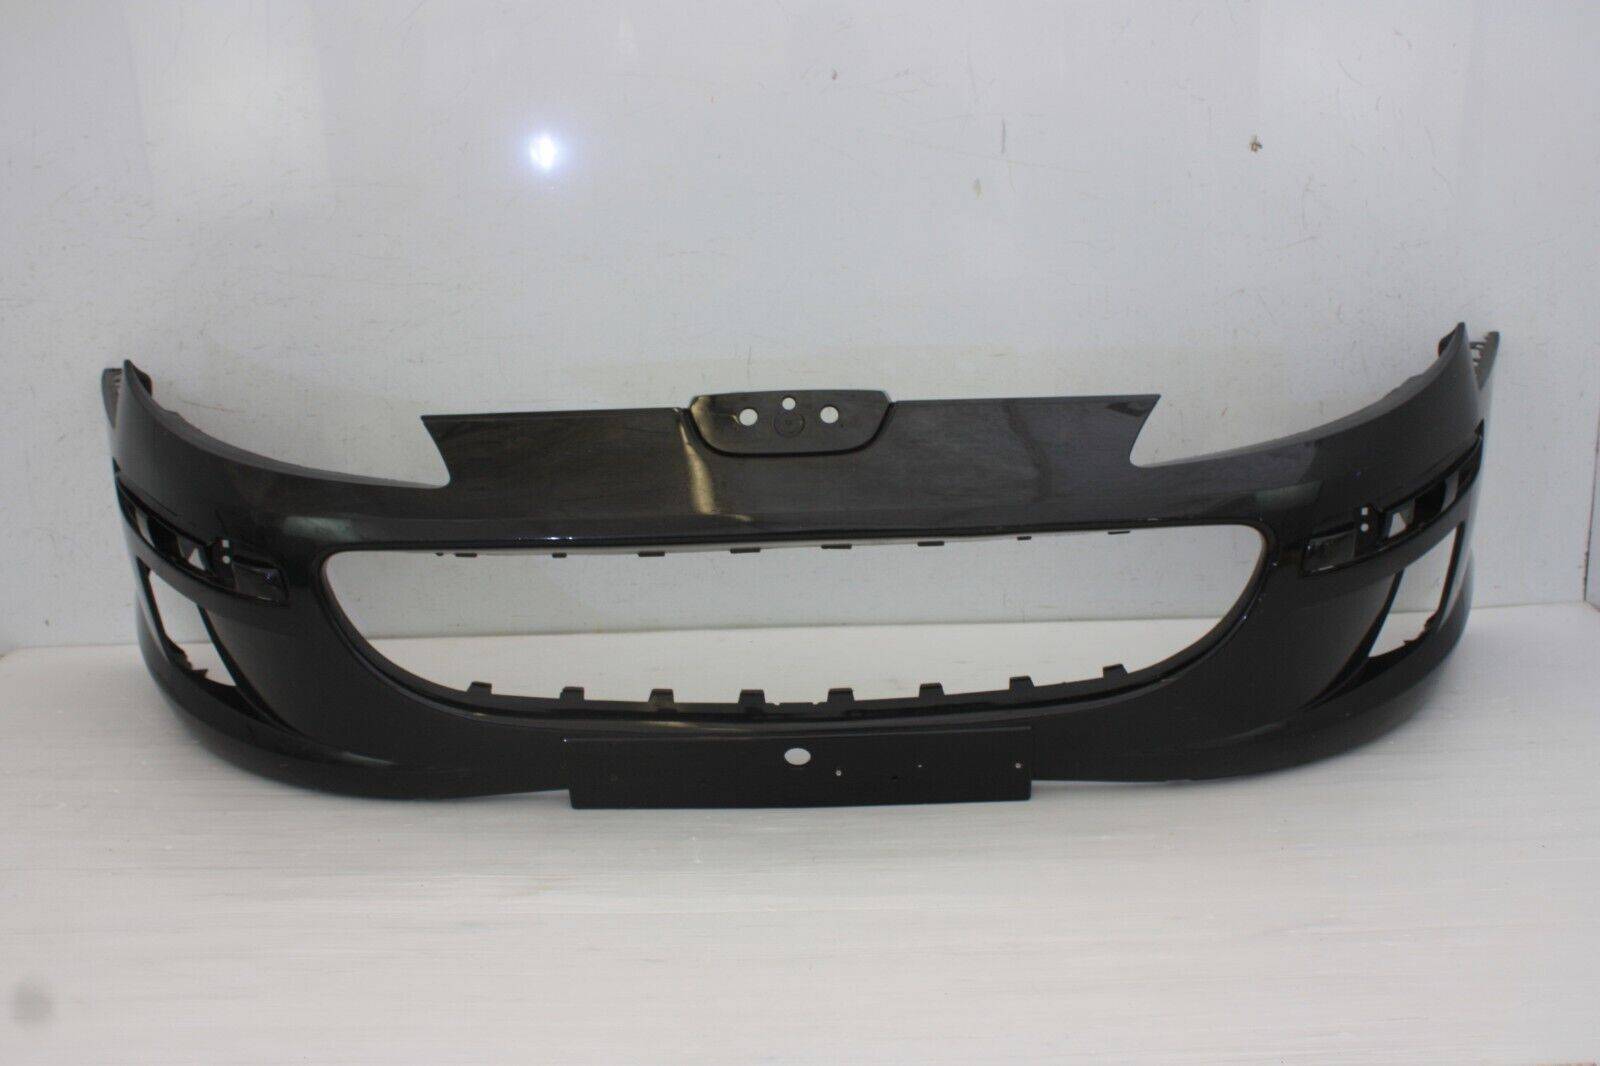 Peugeot-407-Front-Bumper-2004-TO-2008-9644644377-Genuine-175689479809